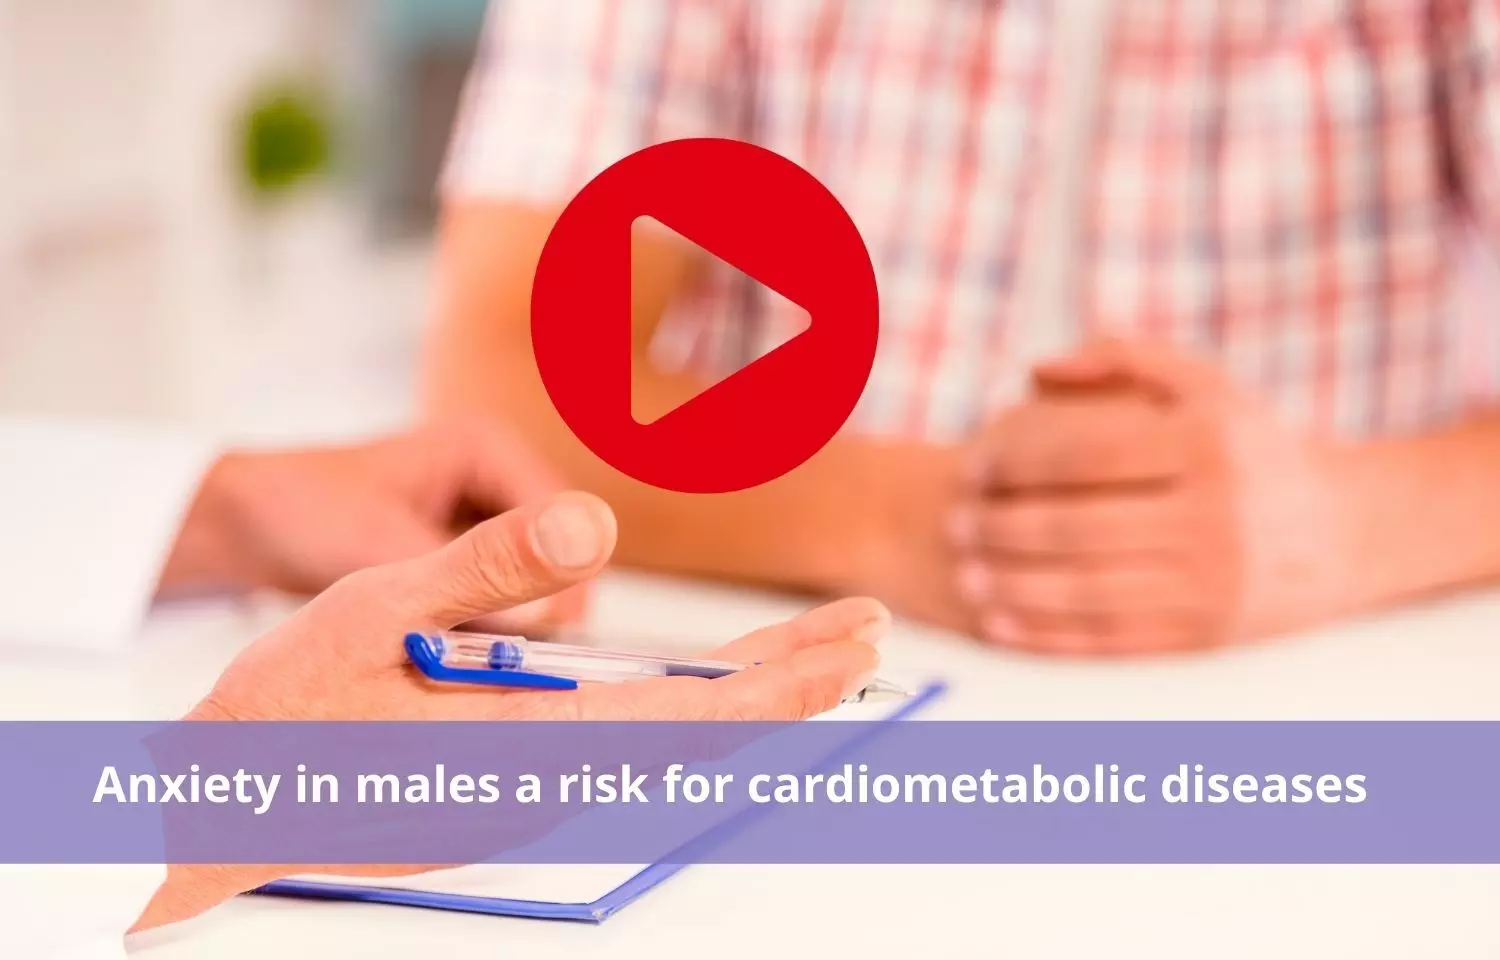 Anxiety: a risk factor for cardiometabolic diseases in males